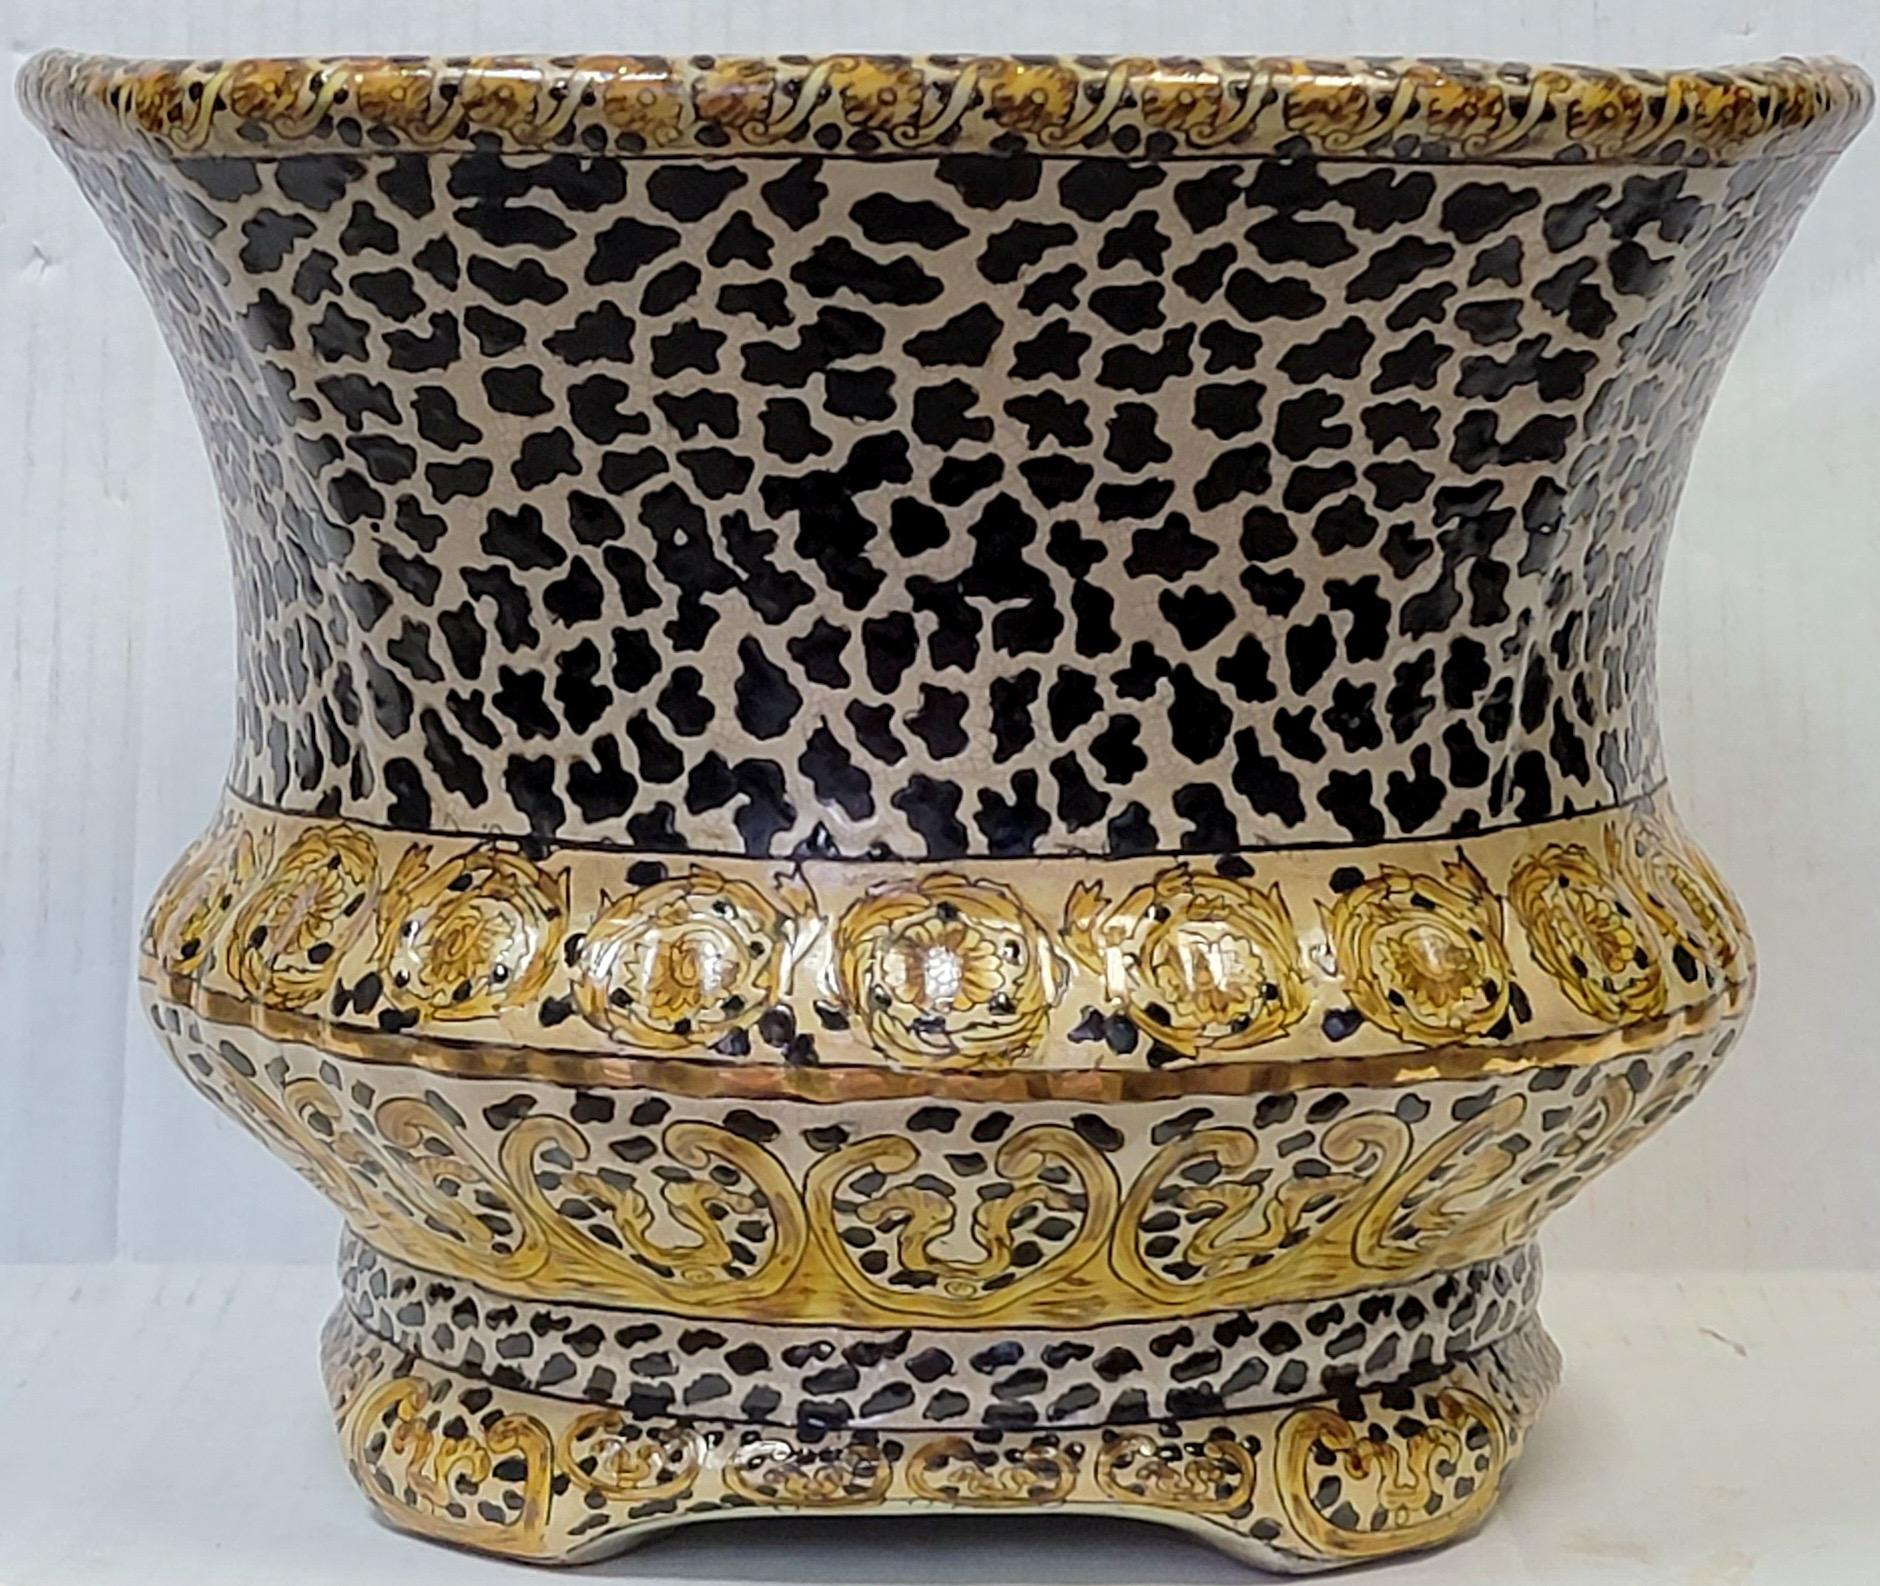 Ceramic Late 20th-C. Large Chinese Export Style Leopard Motif Planter / Cachepot / Vase